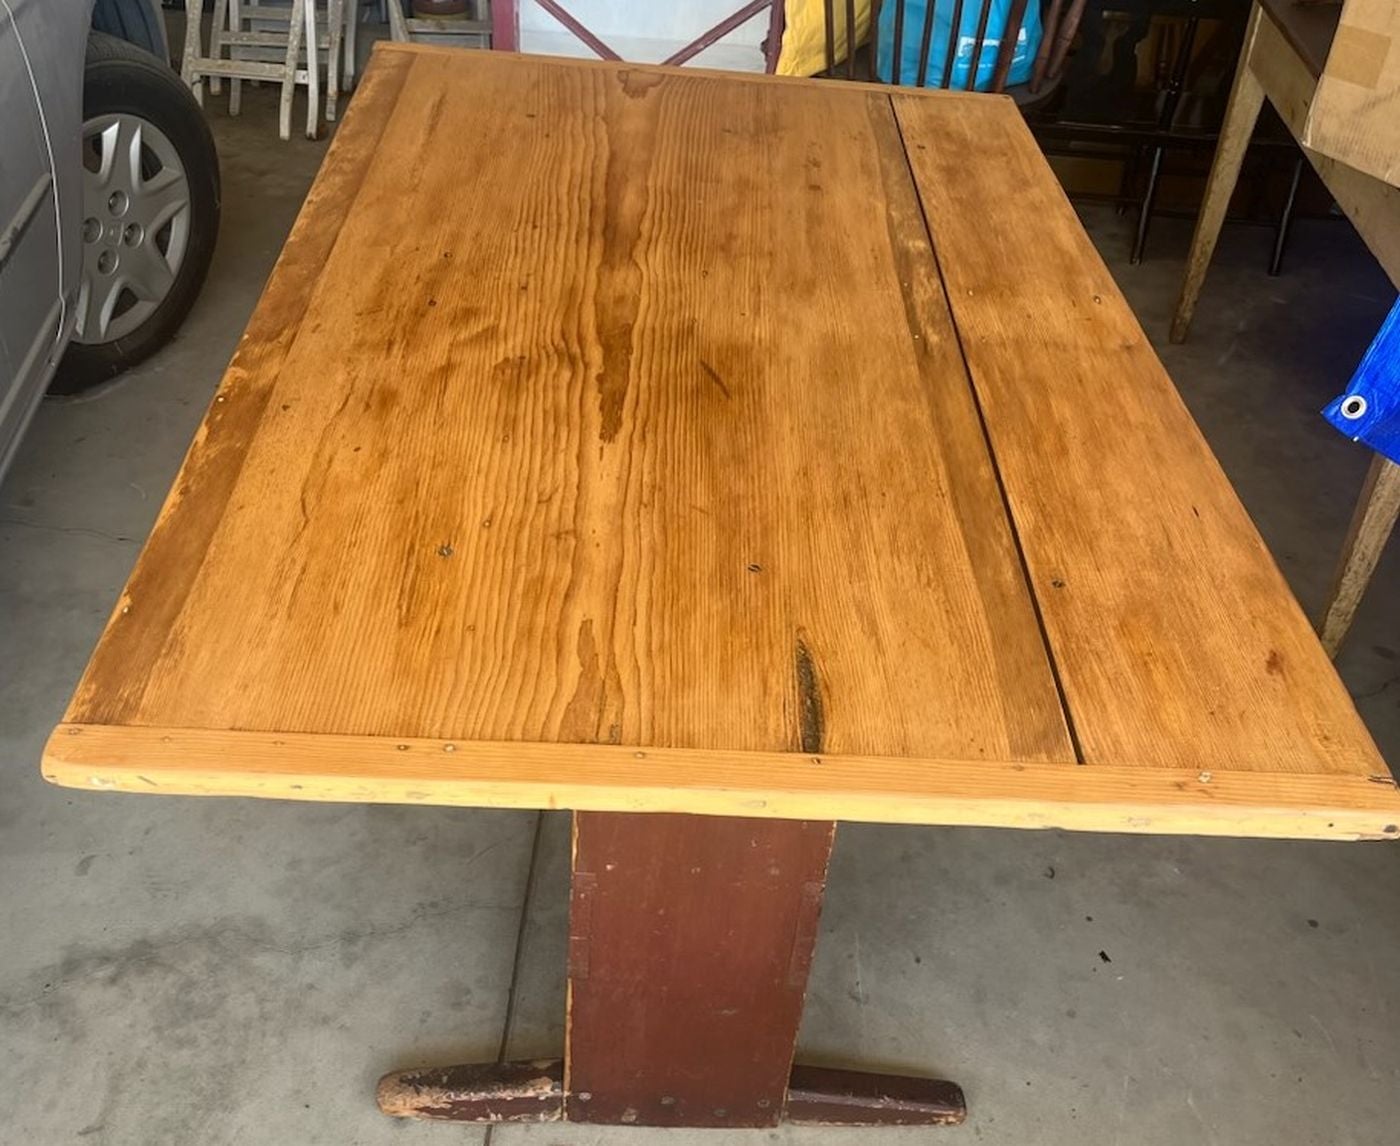 This fantastic all original red painted lift top table with shoe feet and early rose head nails. All original hardware and construction. Take notice to the very narrow seat base. Such a great sweet size. This fantastic folky shaped table is strong